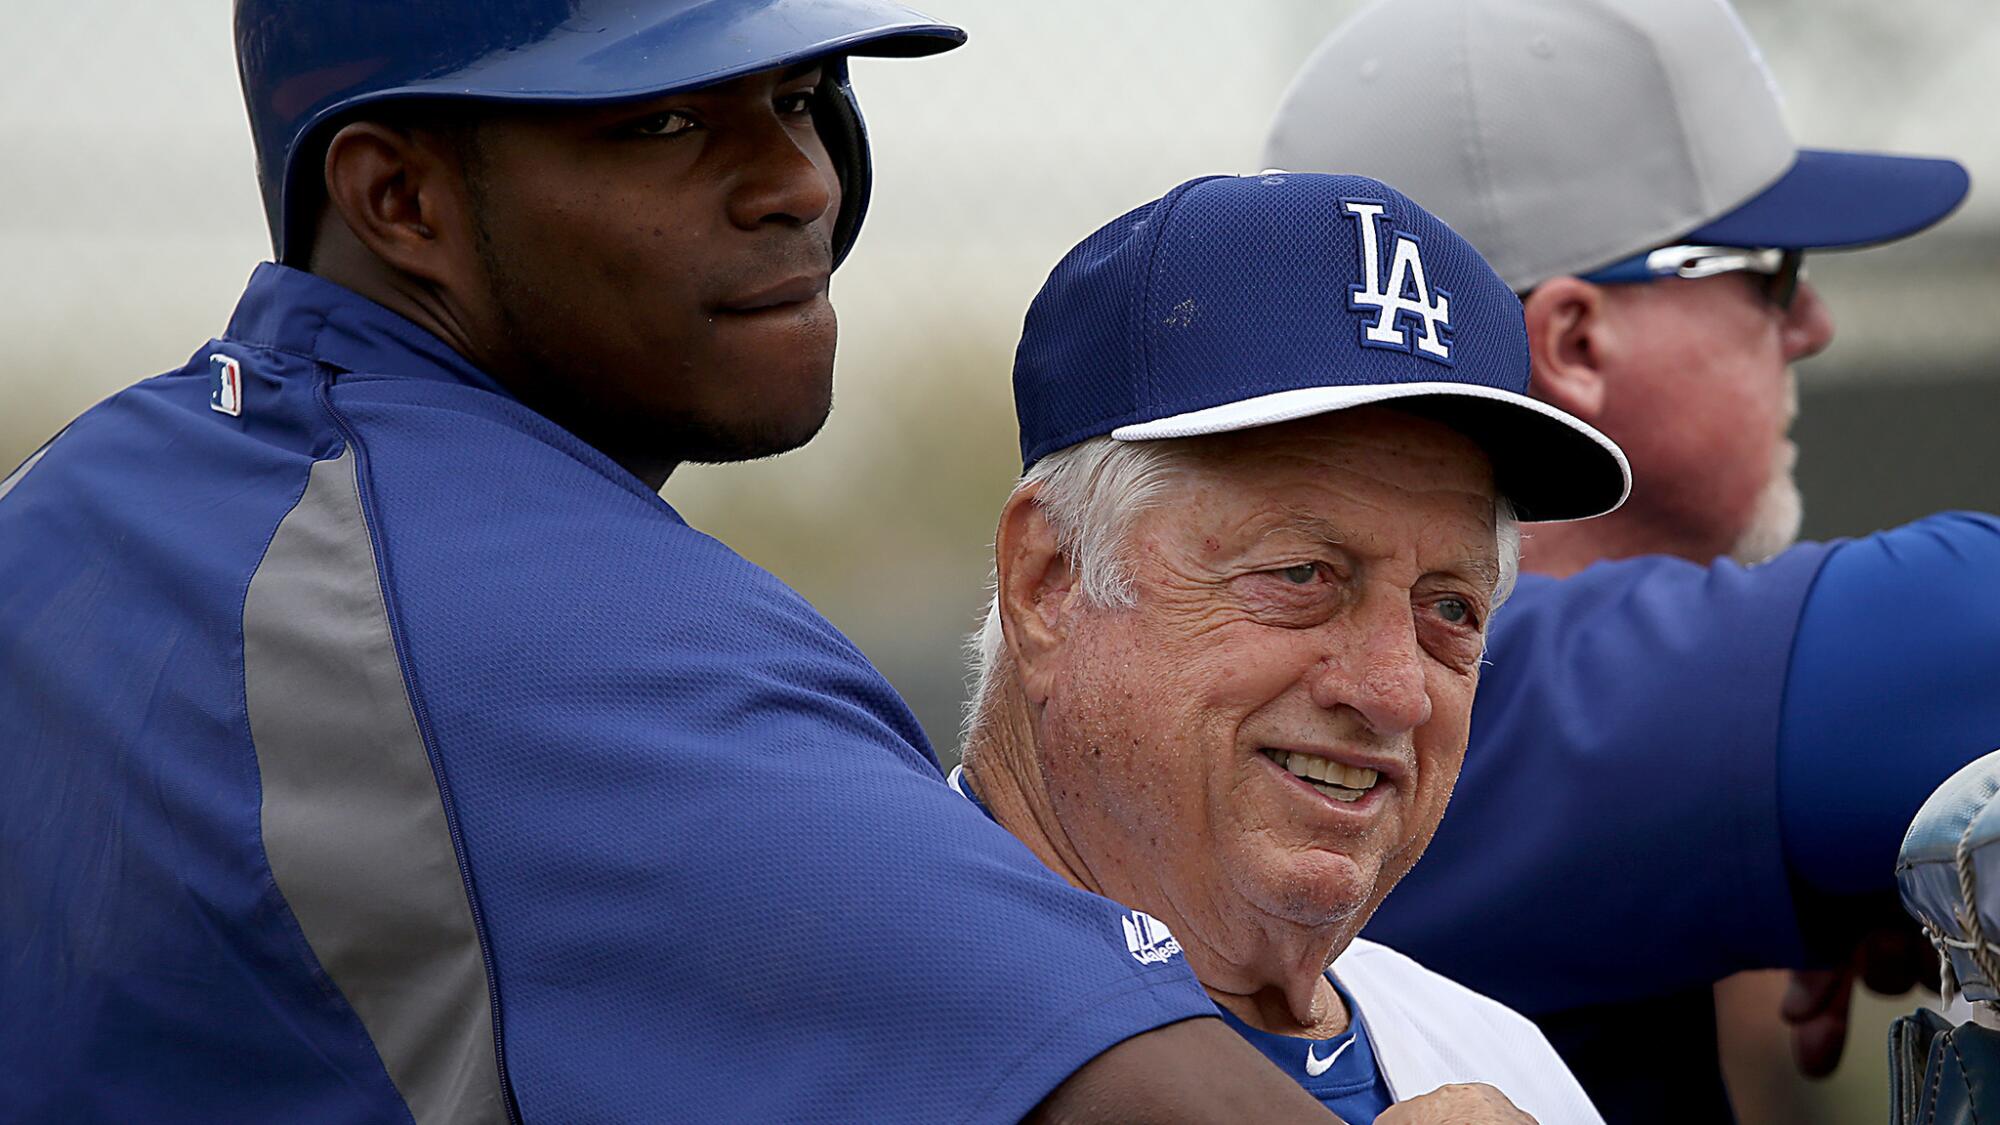 Dodgers outfielder Yasiel Puig hugs Tommy Lasorda during spring training in February 2014.